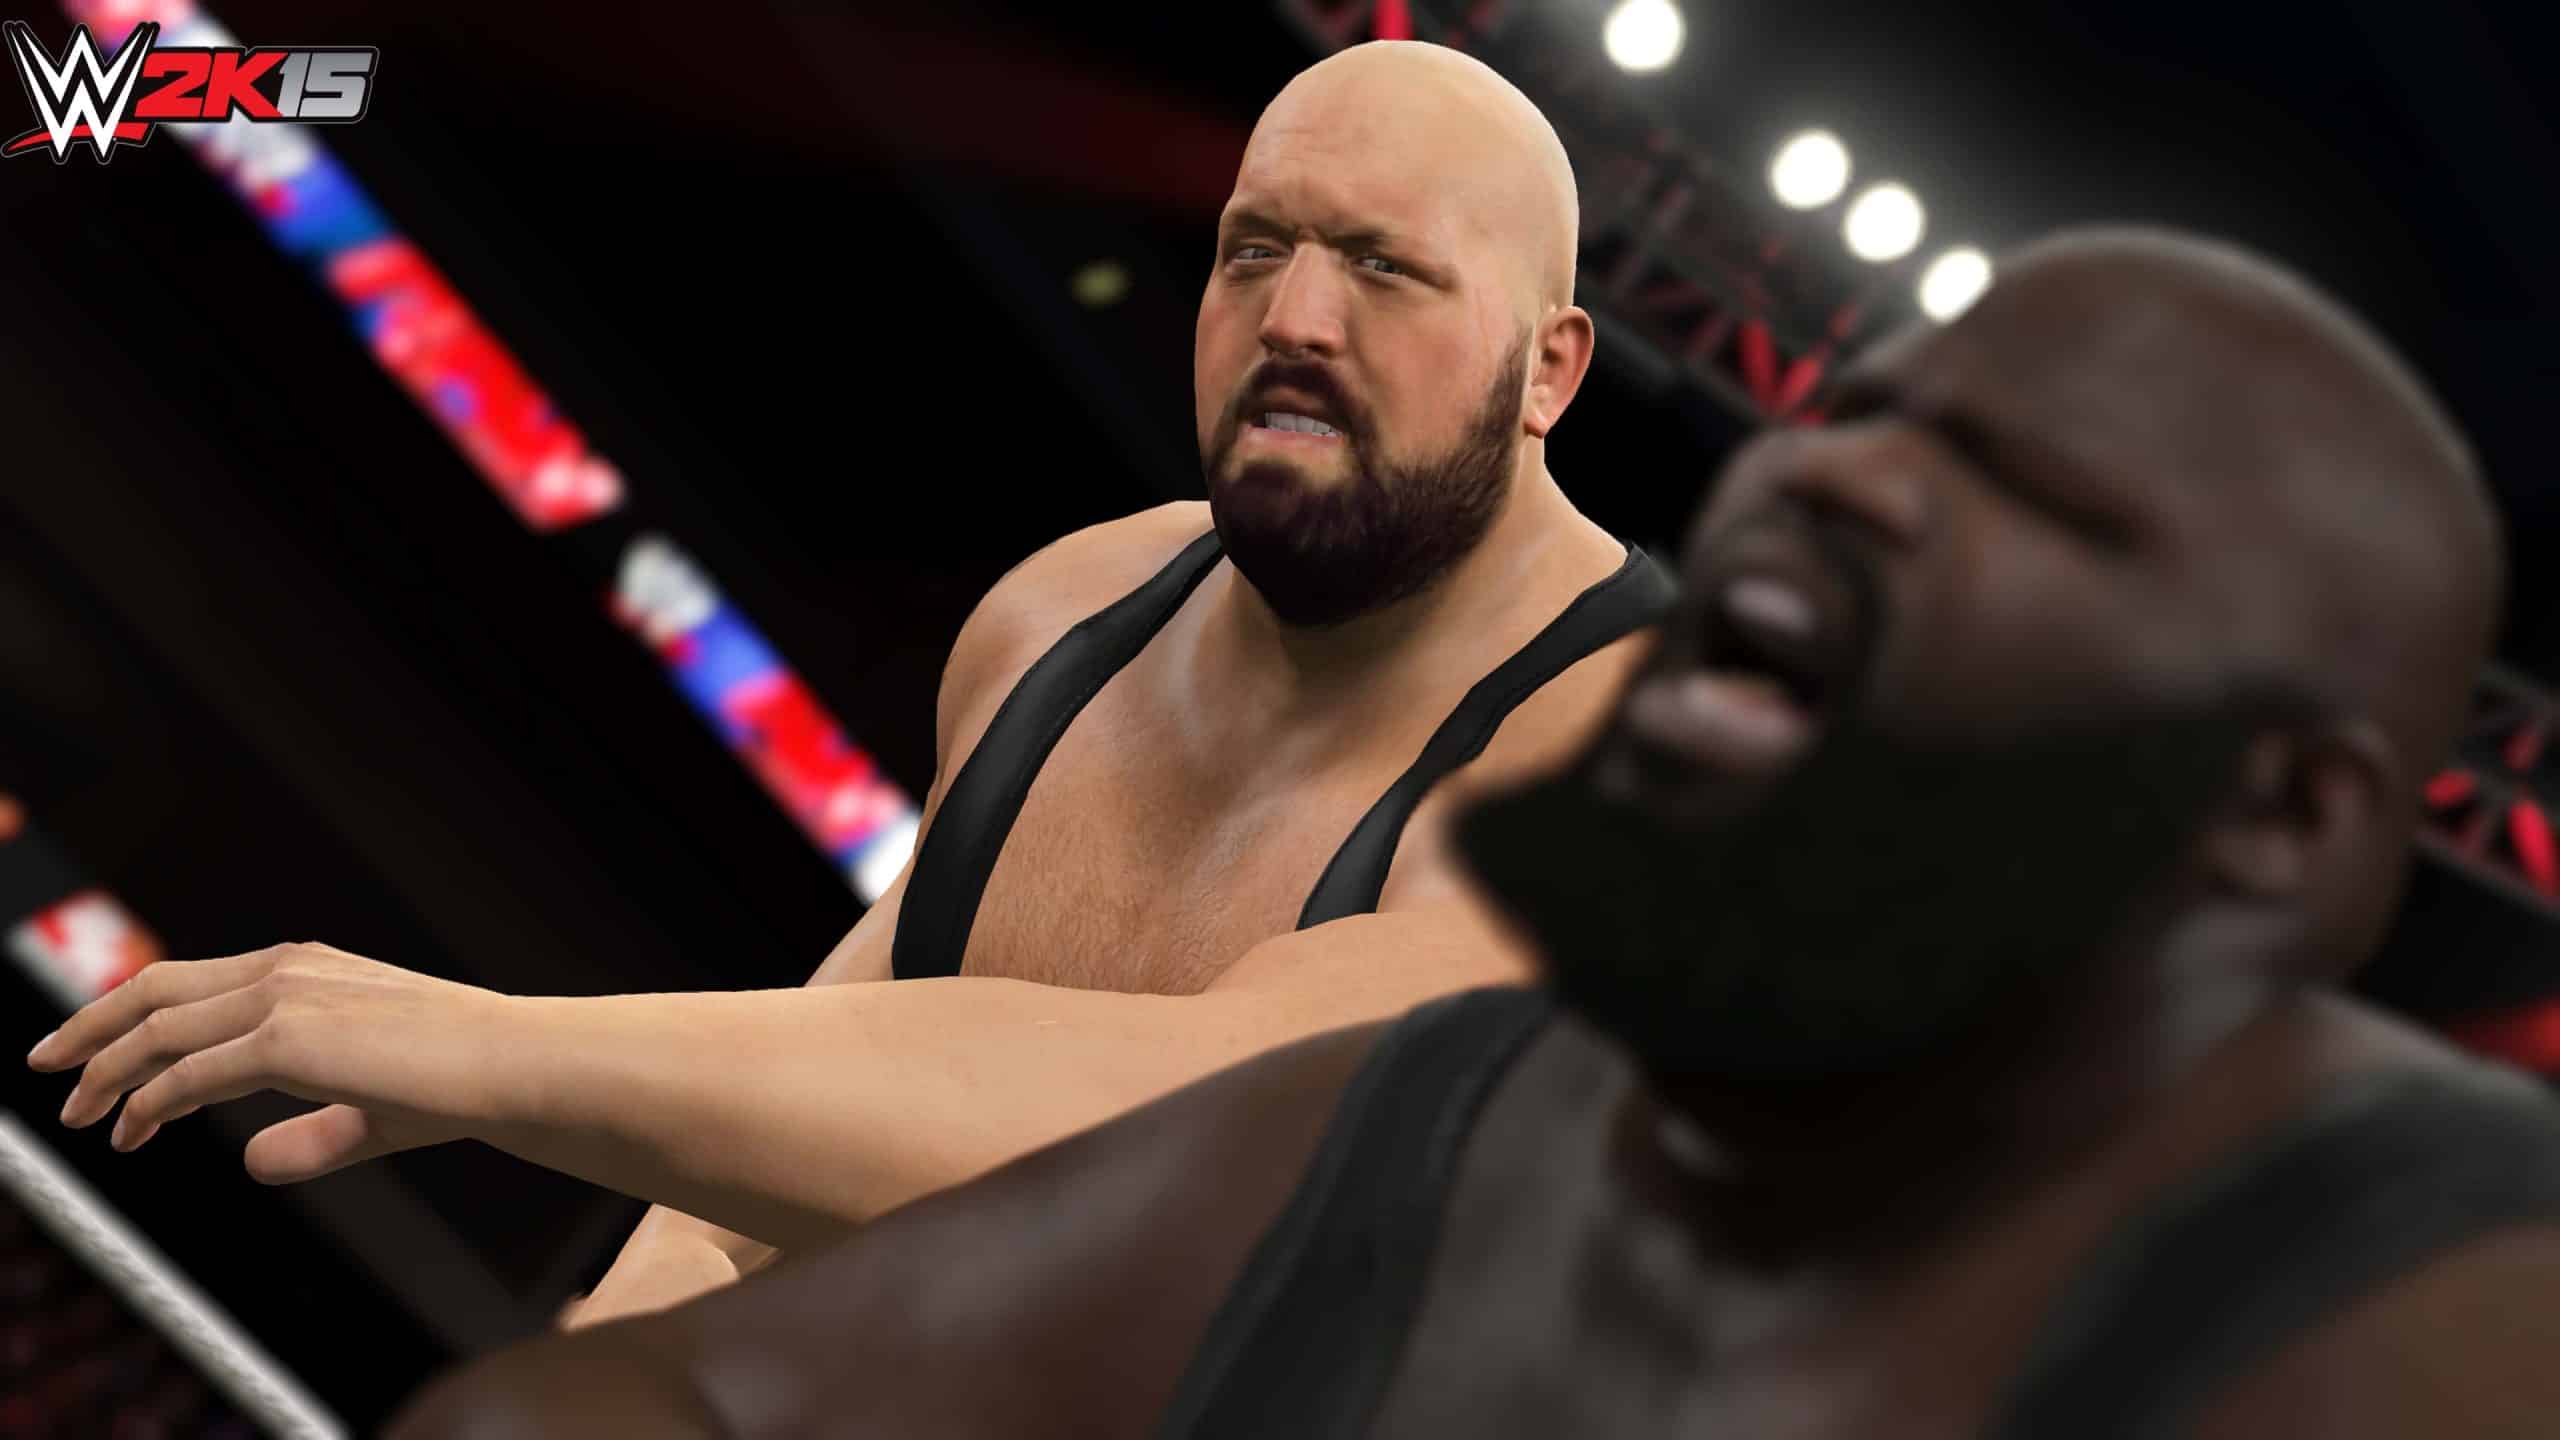 wwe 2k10 pc system requirements